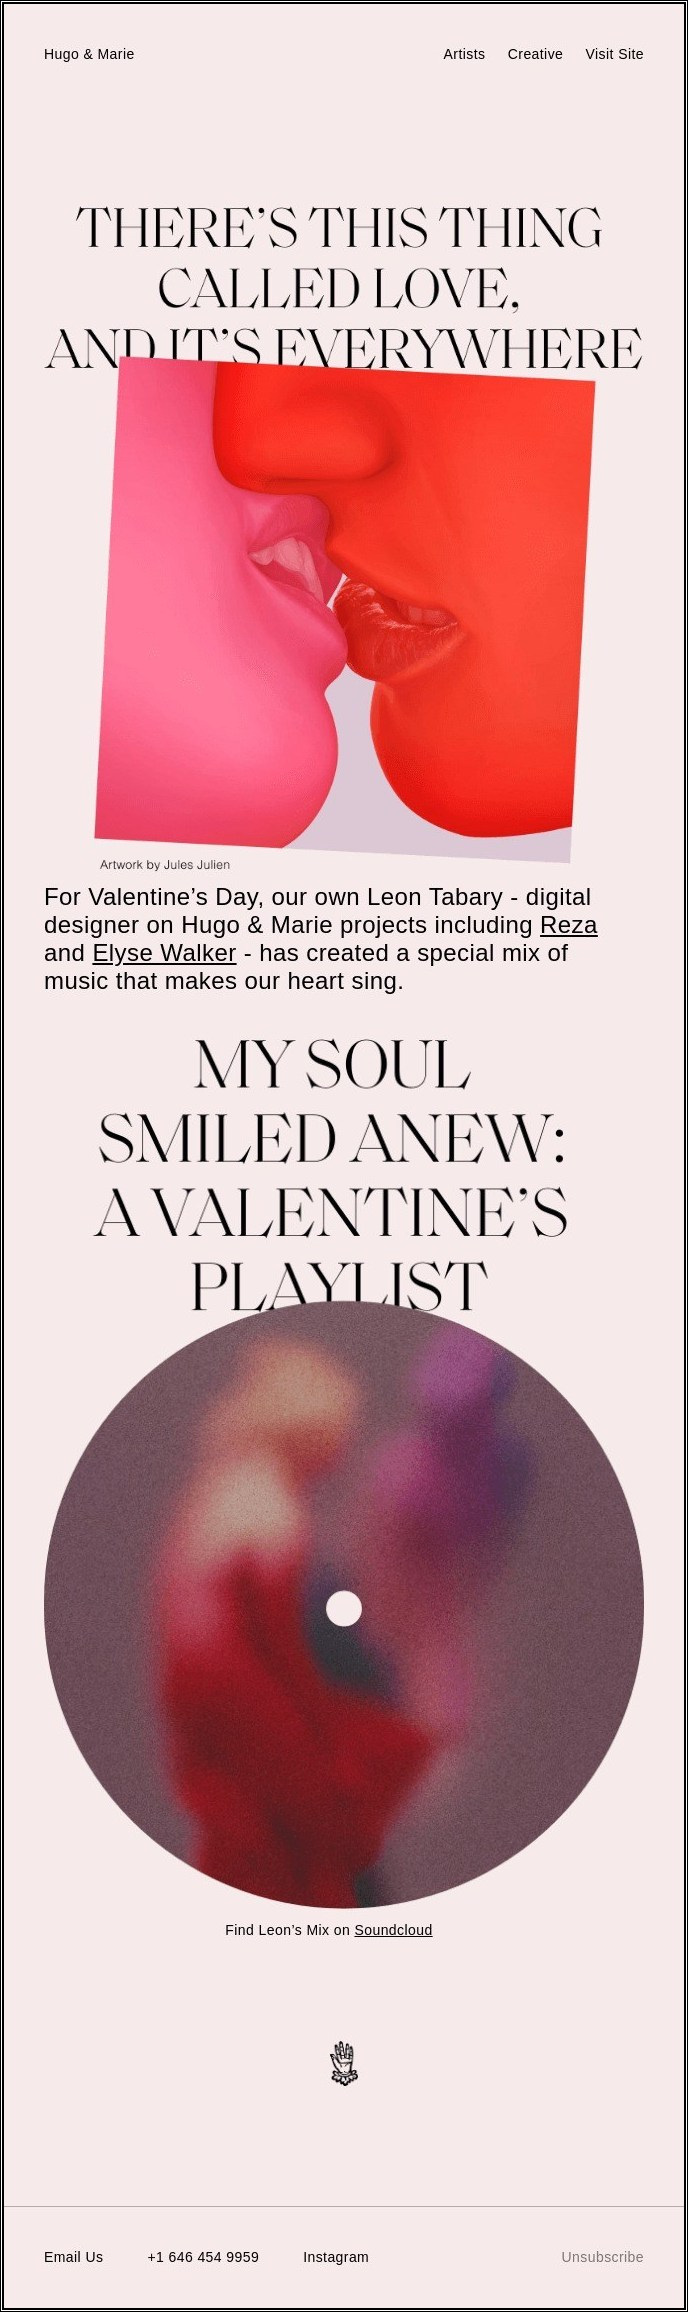 Hugo and Marie provide a great example of a Valentine’s Day playlist..jpg 